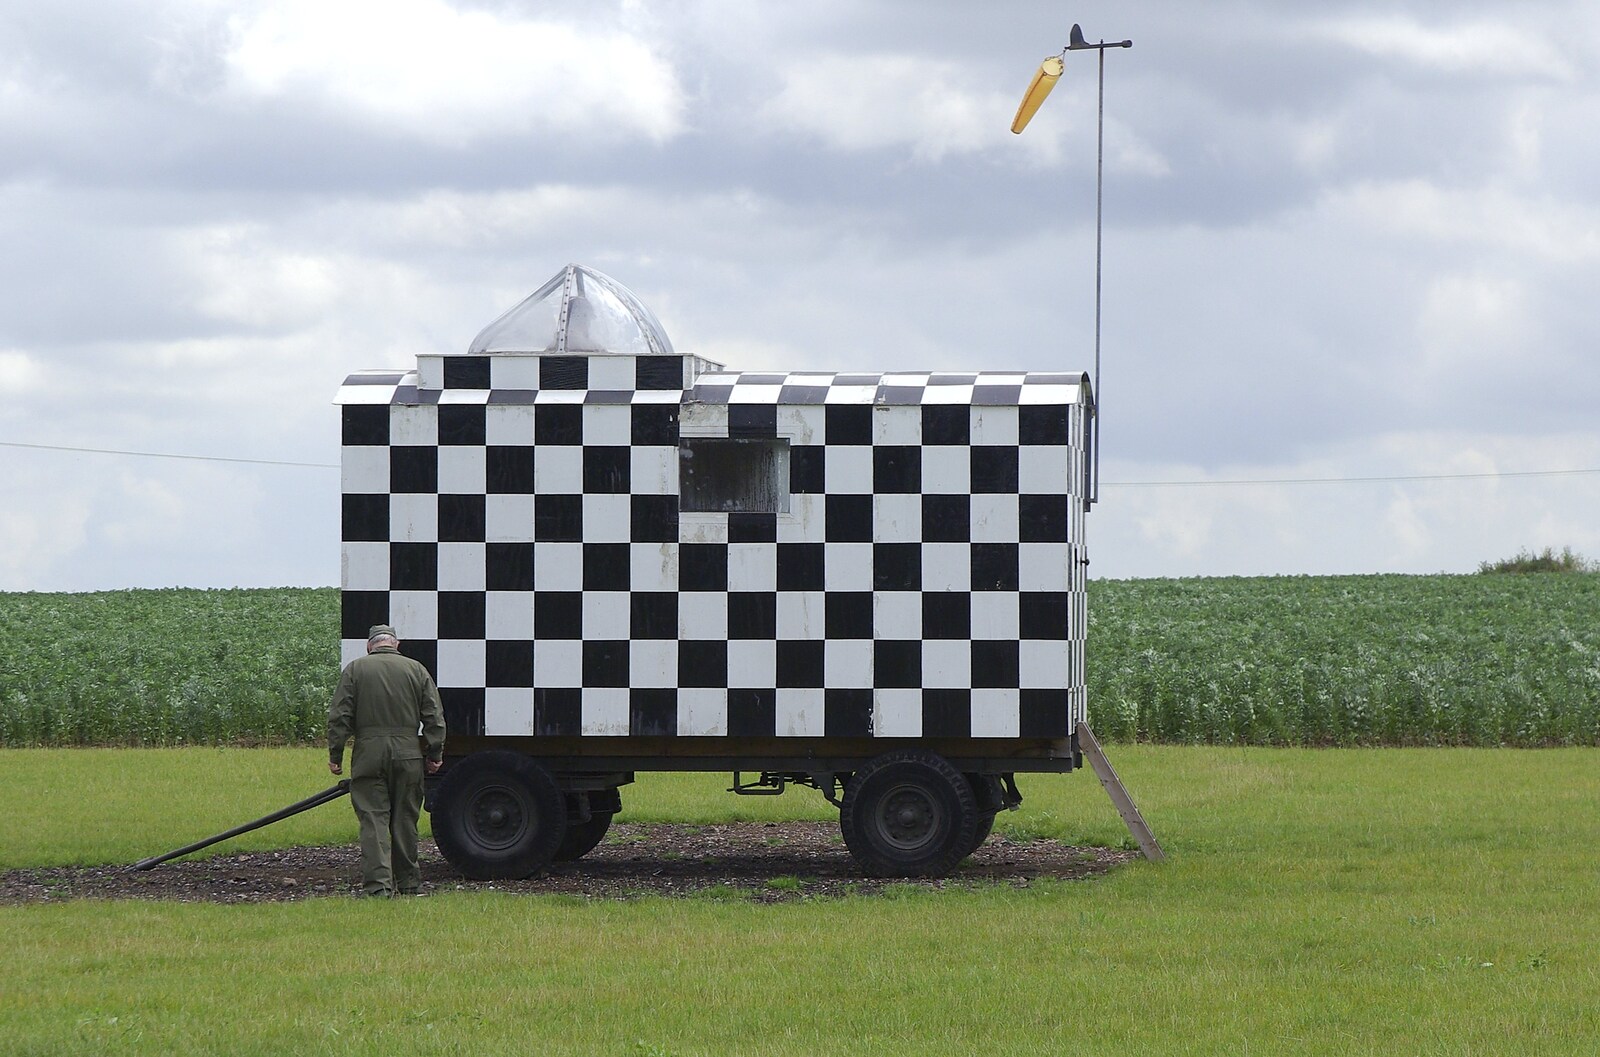 A mobile observation unit from Debach And the B-17 "Liberty Belle", Suffolk - 12th July 2008